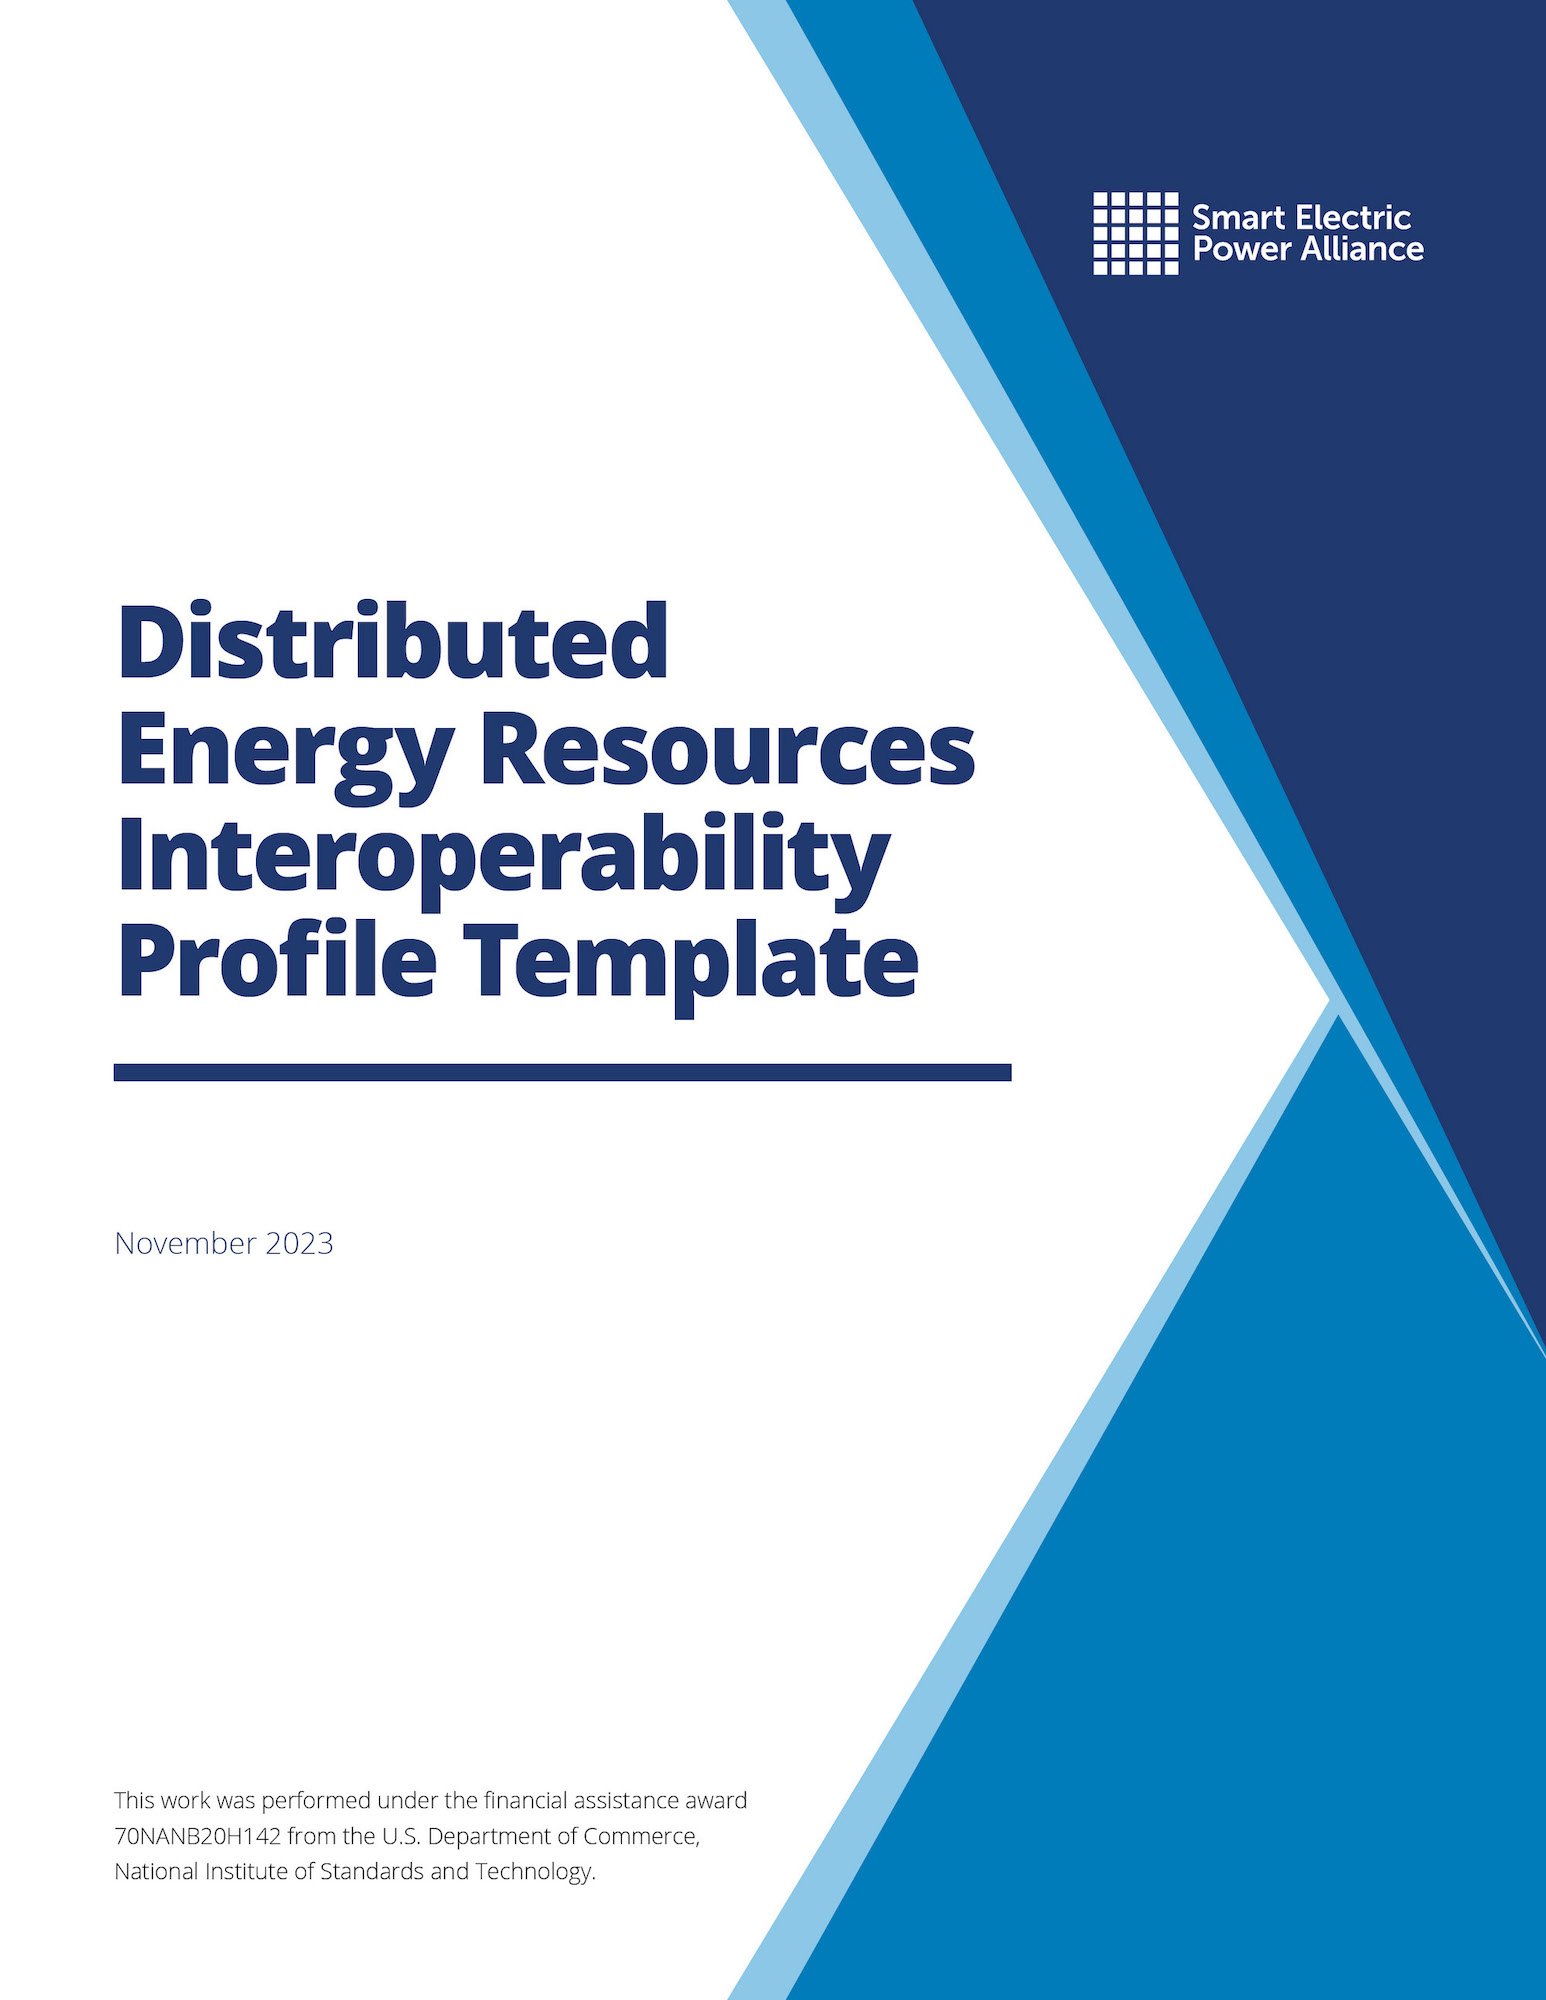 Distributed Energy Resources Interoperability Profile Template